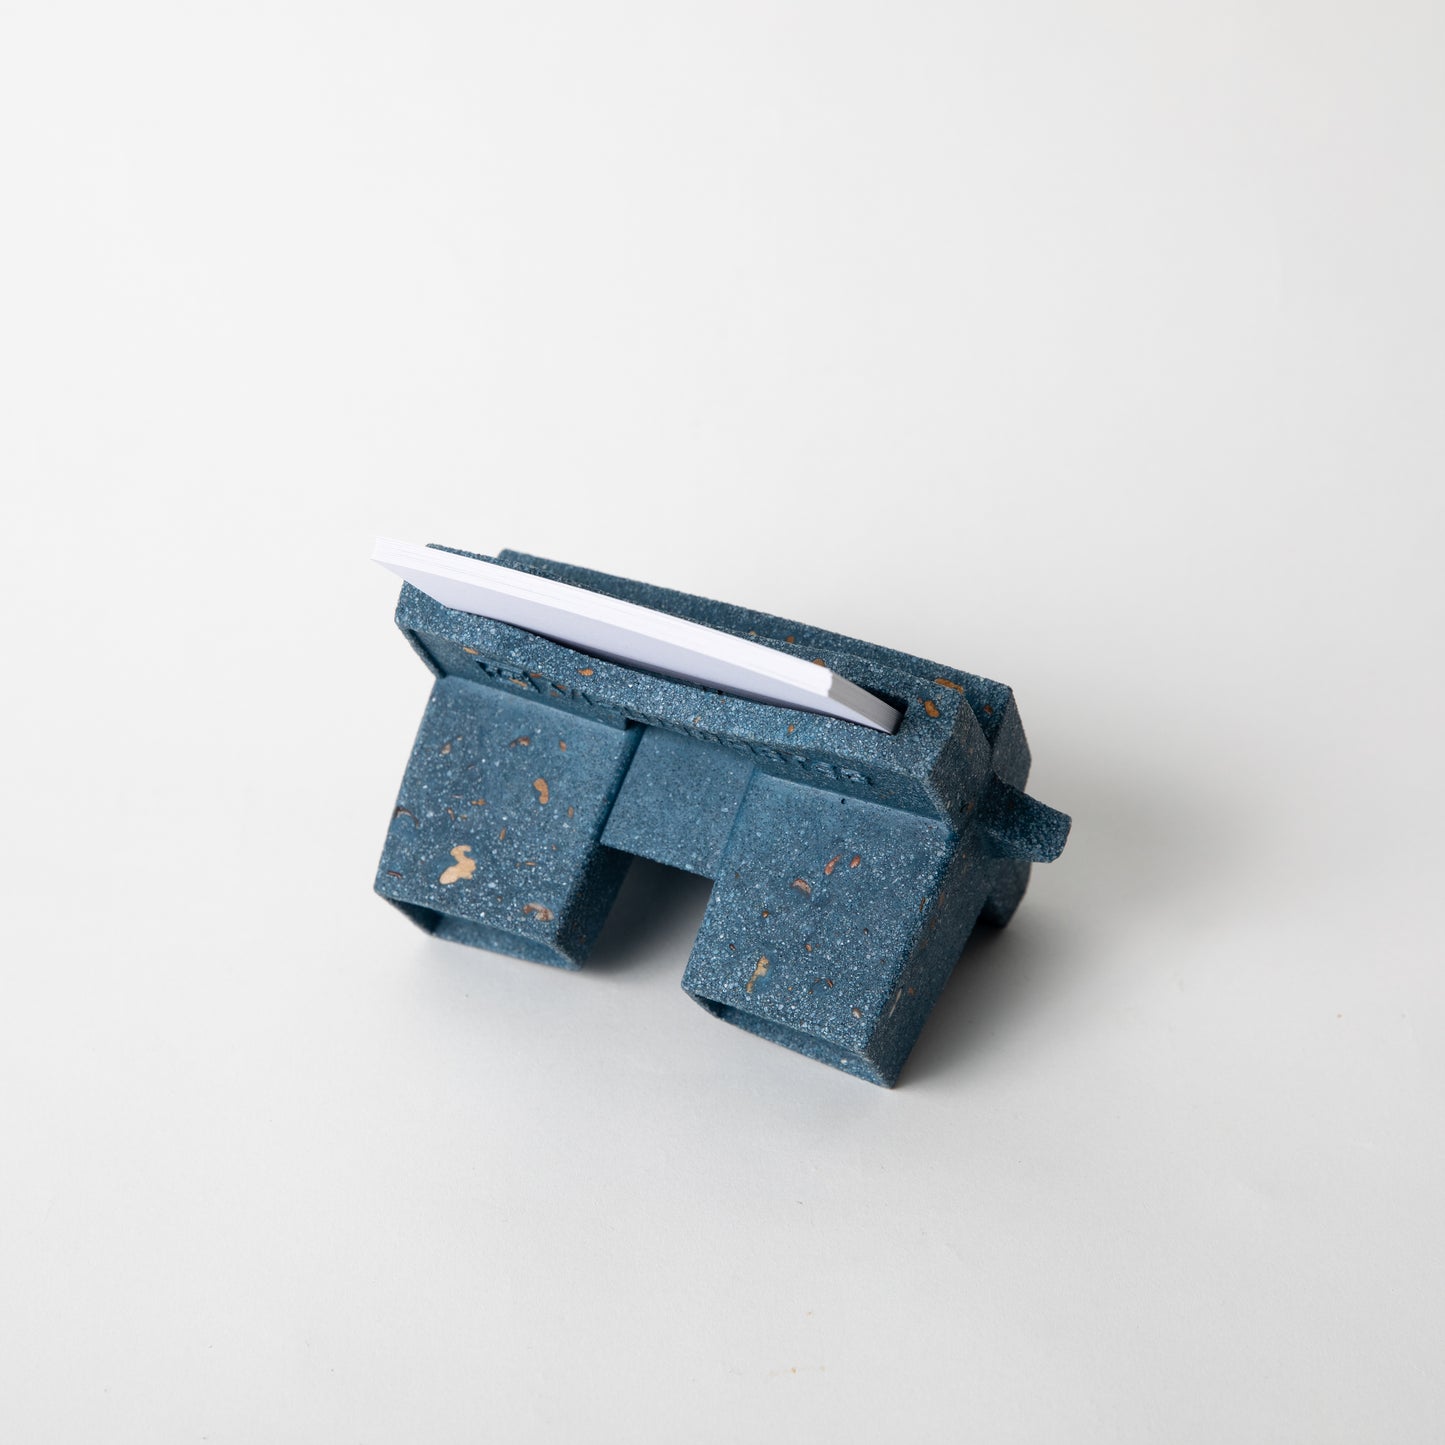 The Retro Business Card Holder in Cobalt Terrazzo w/ blank business cards placed inside.